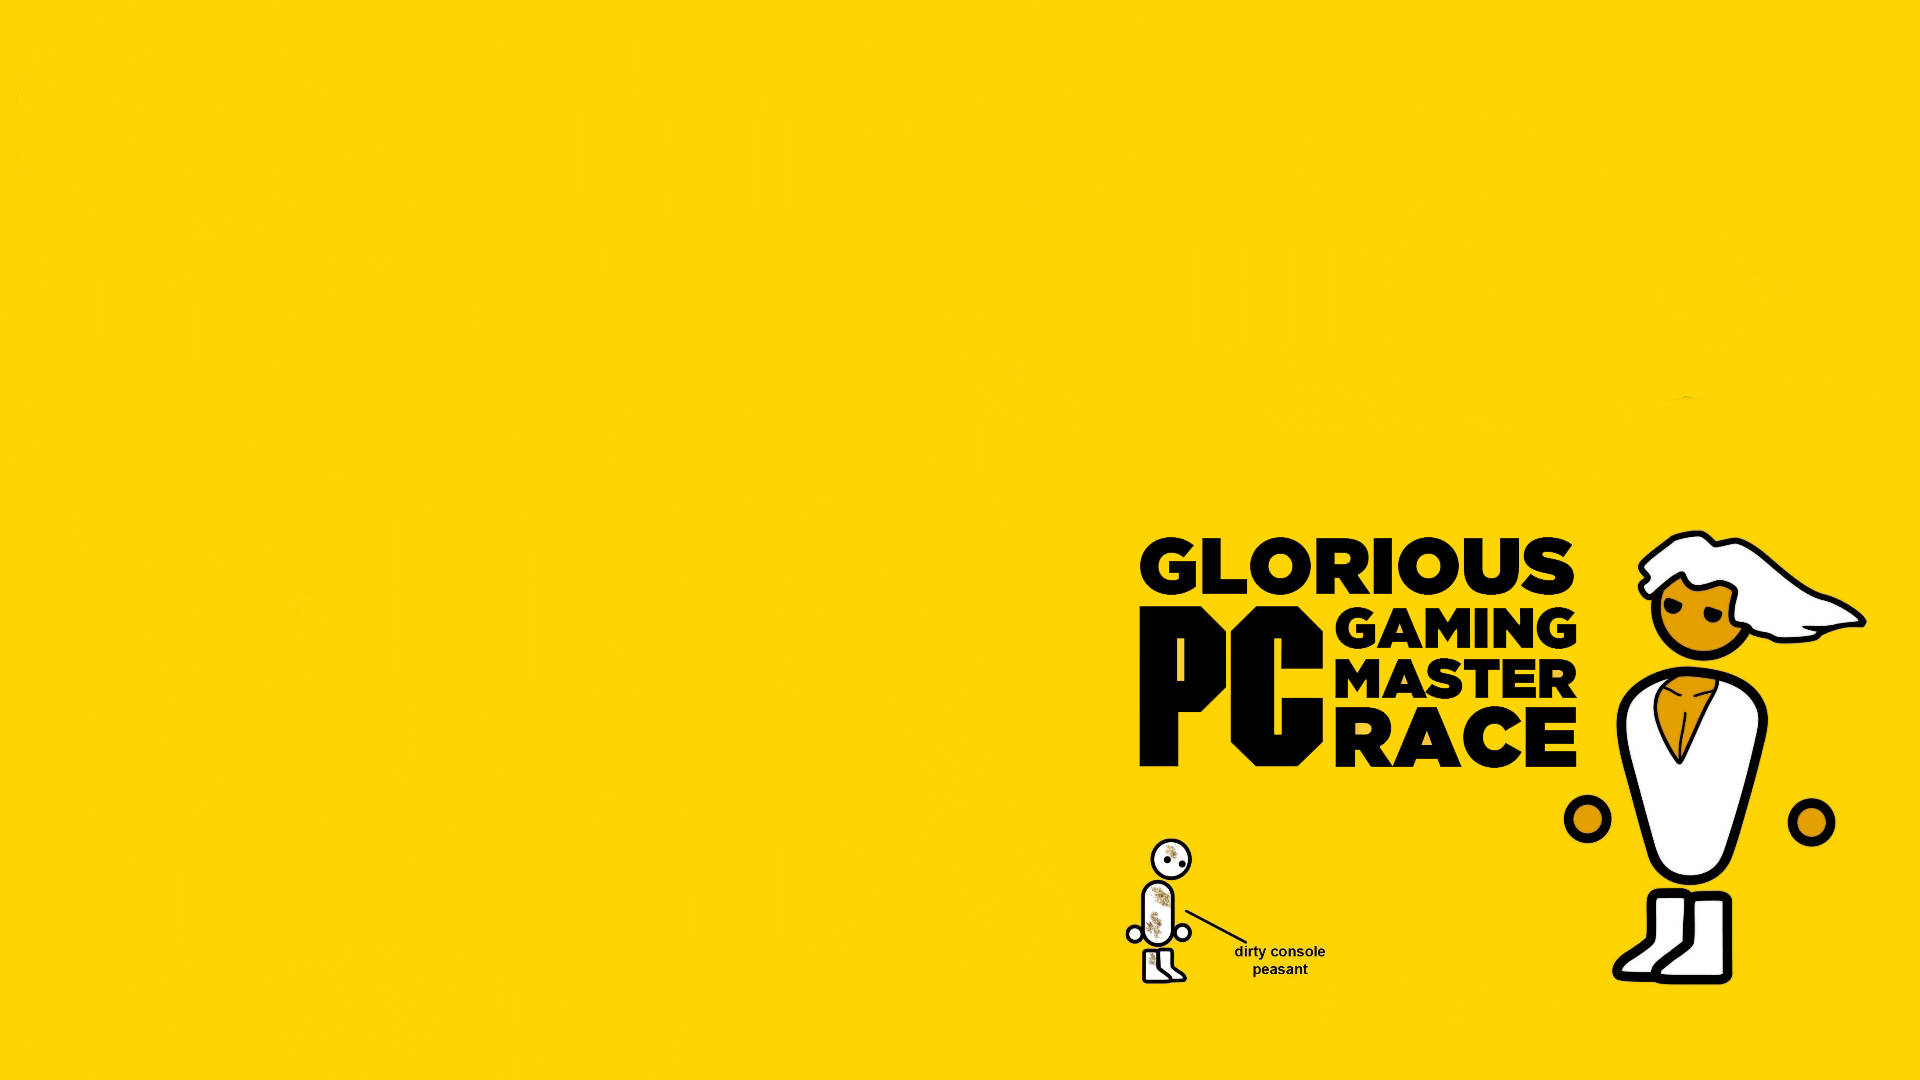 Glorious Pc Master Race Yellow Picture